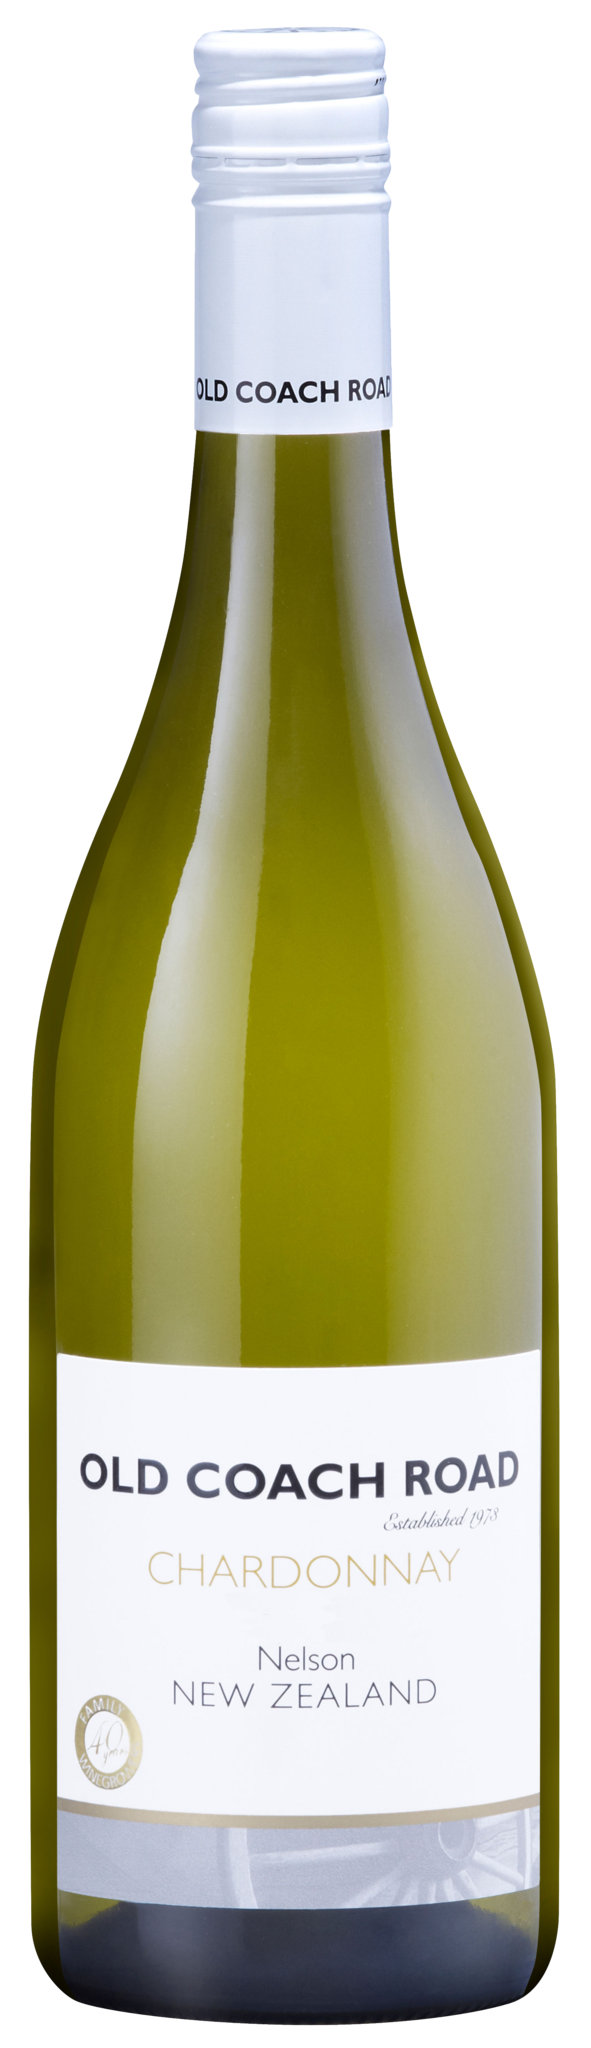 Old Coach Road Nelson Chardonnay 2017 - Wines of NZ